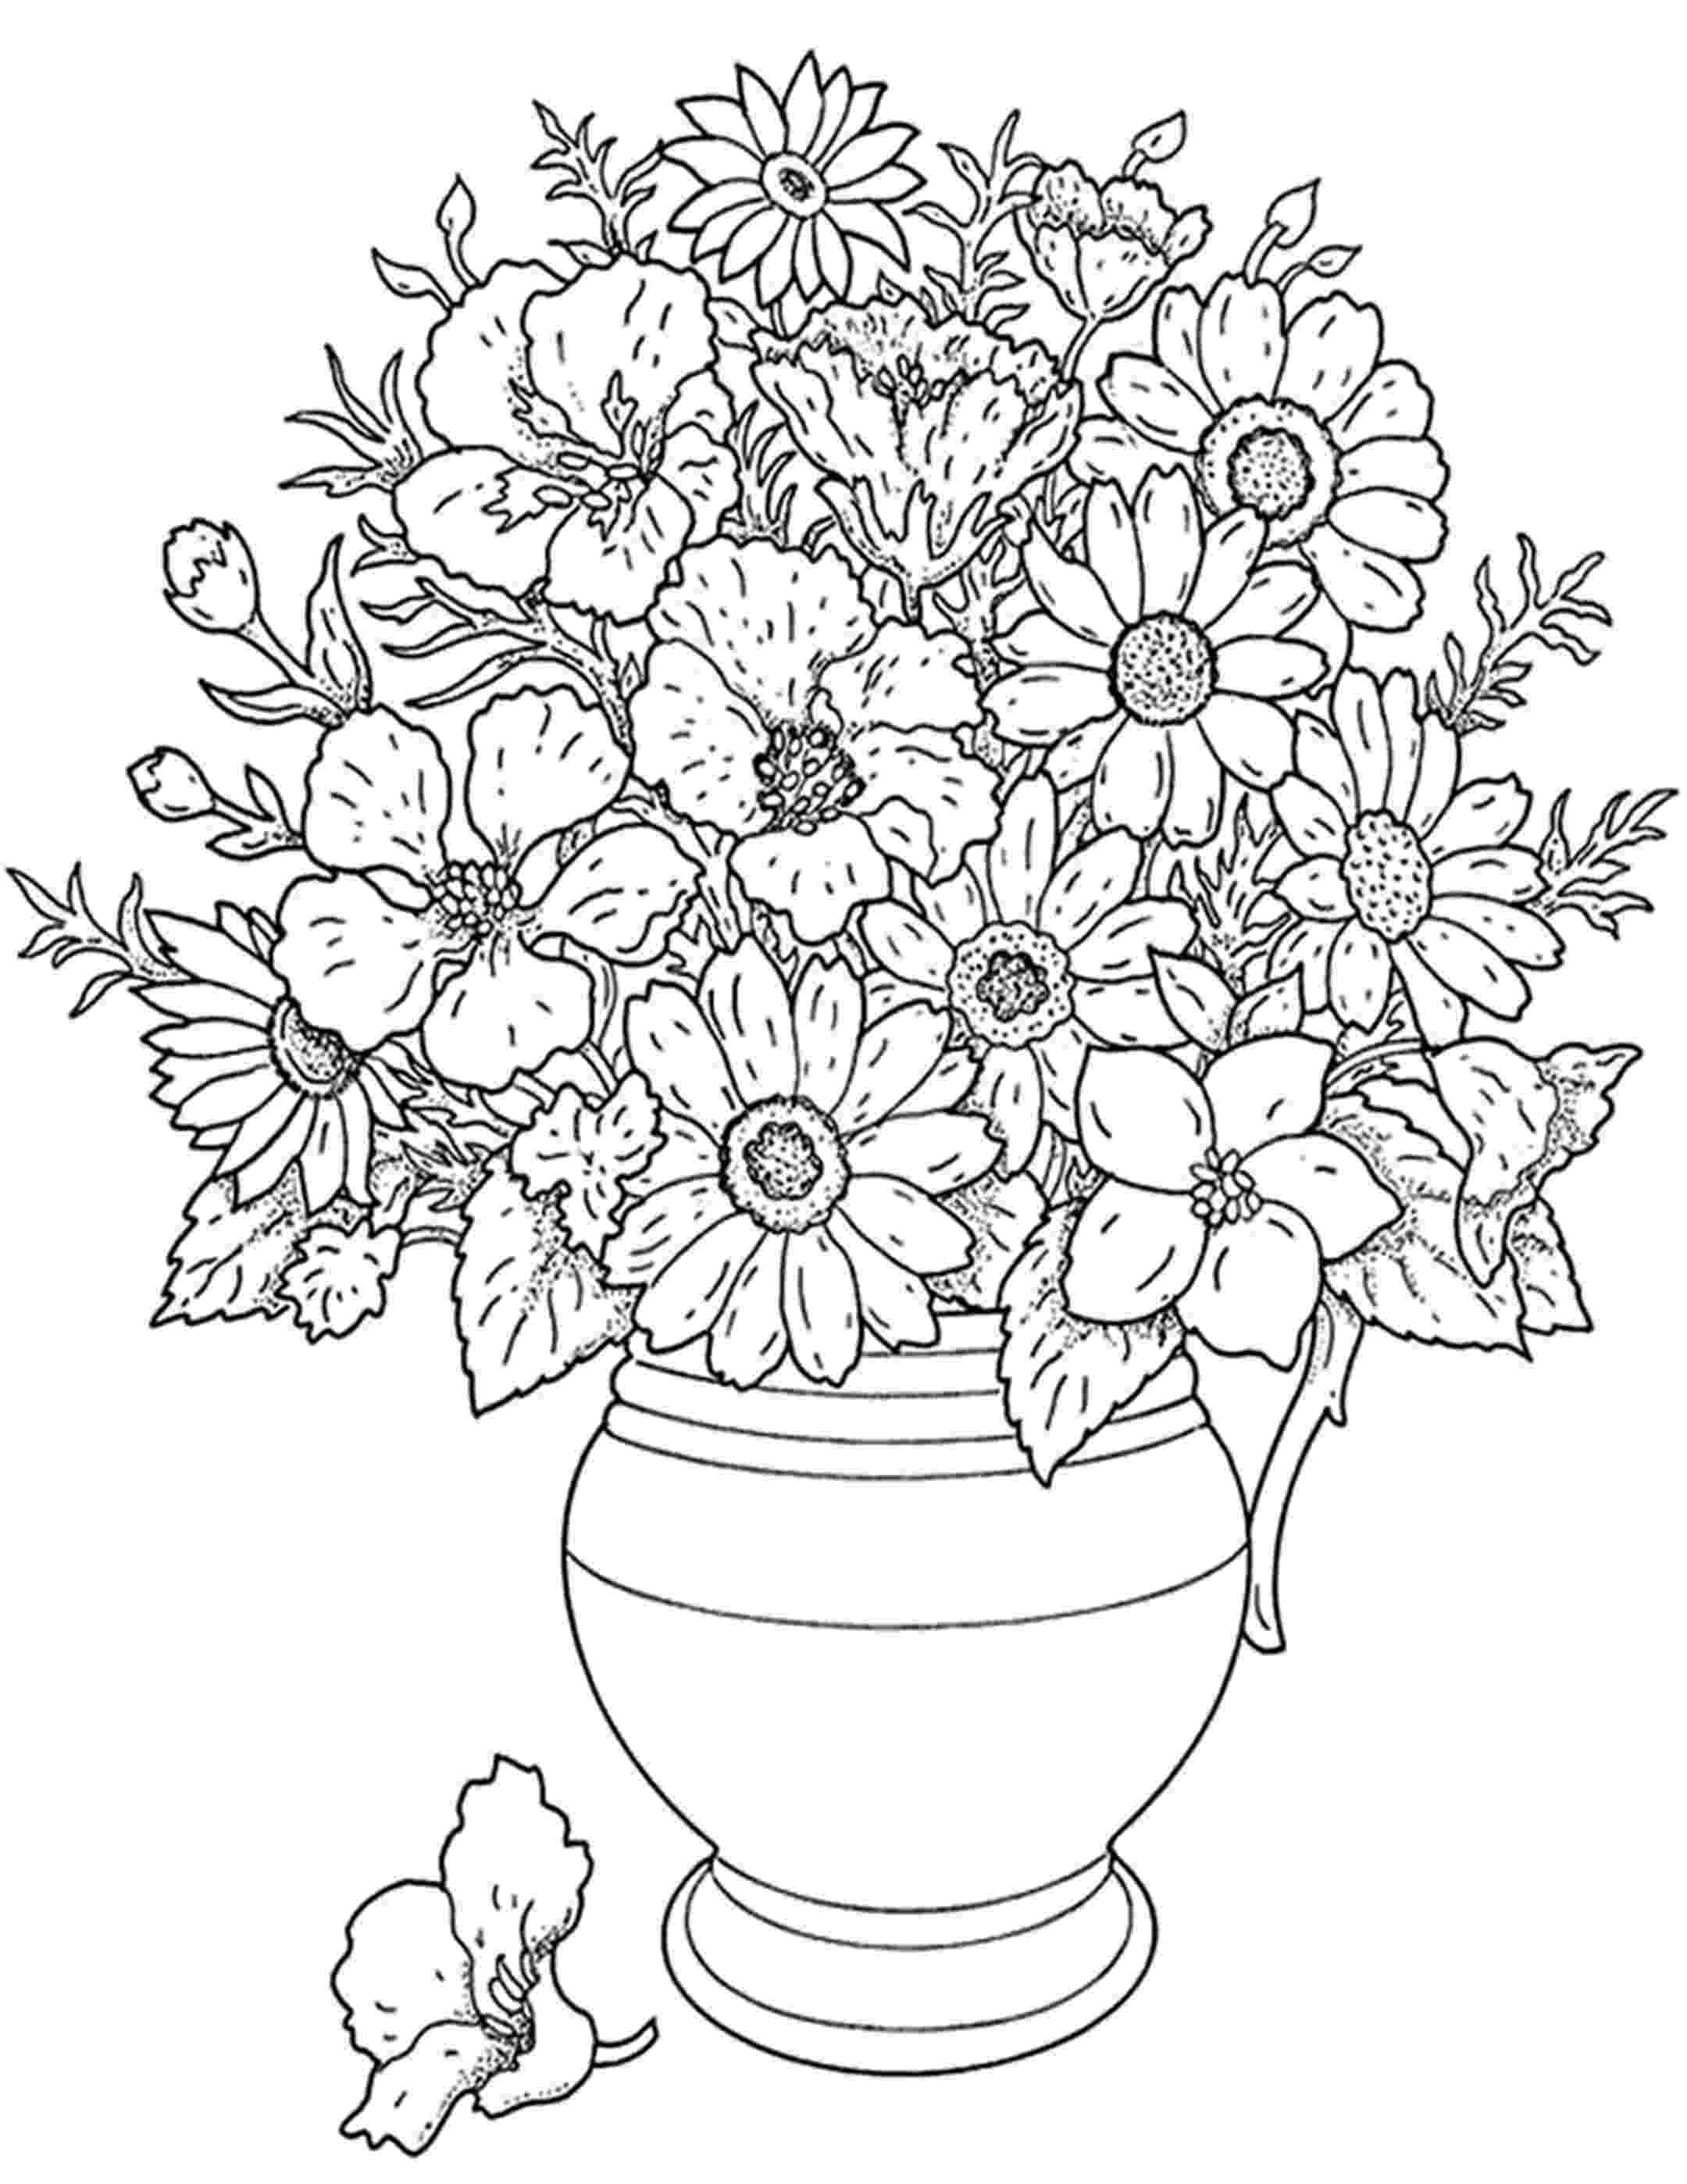 flower coloring sheets for kids free printable flower coloring pages for kids best coloring flower sheets kids for 